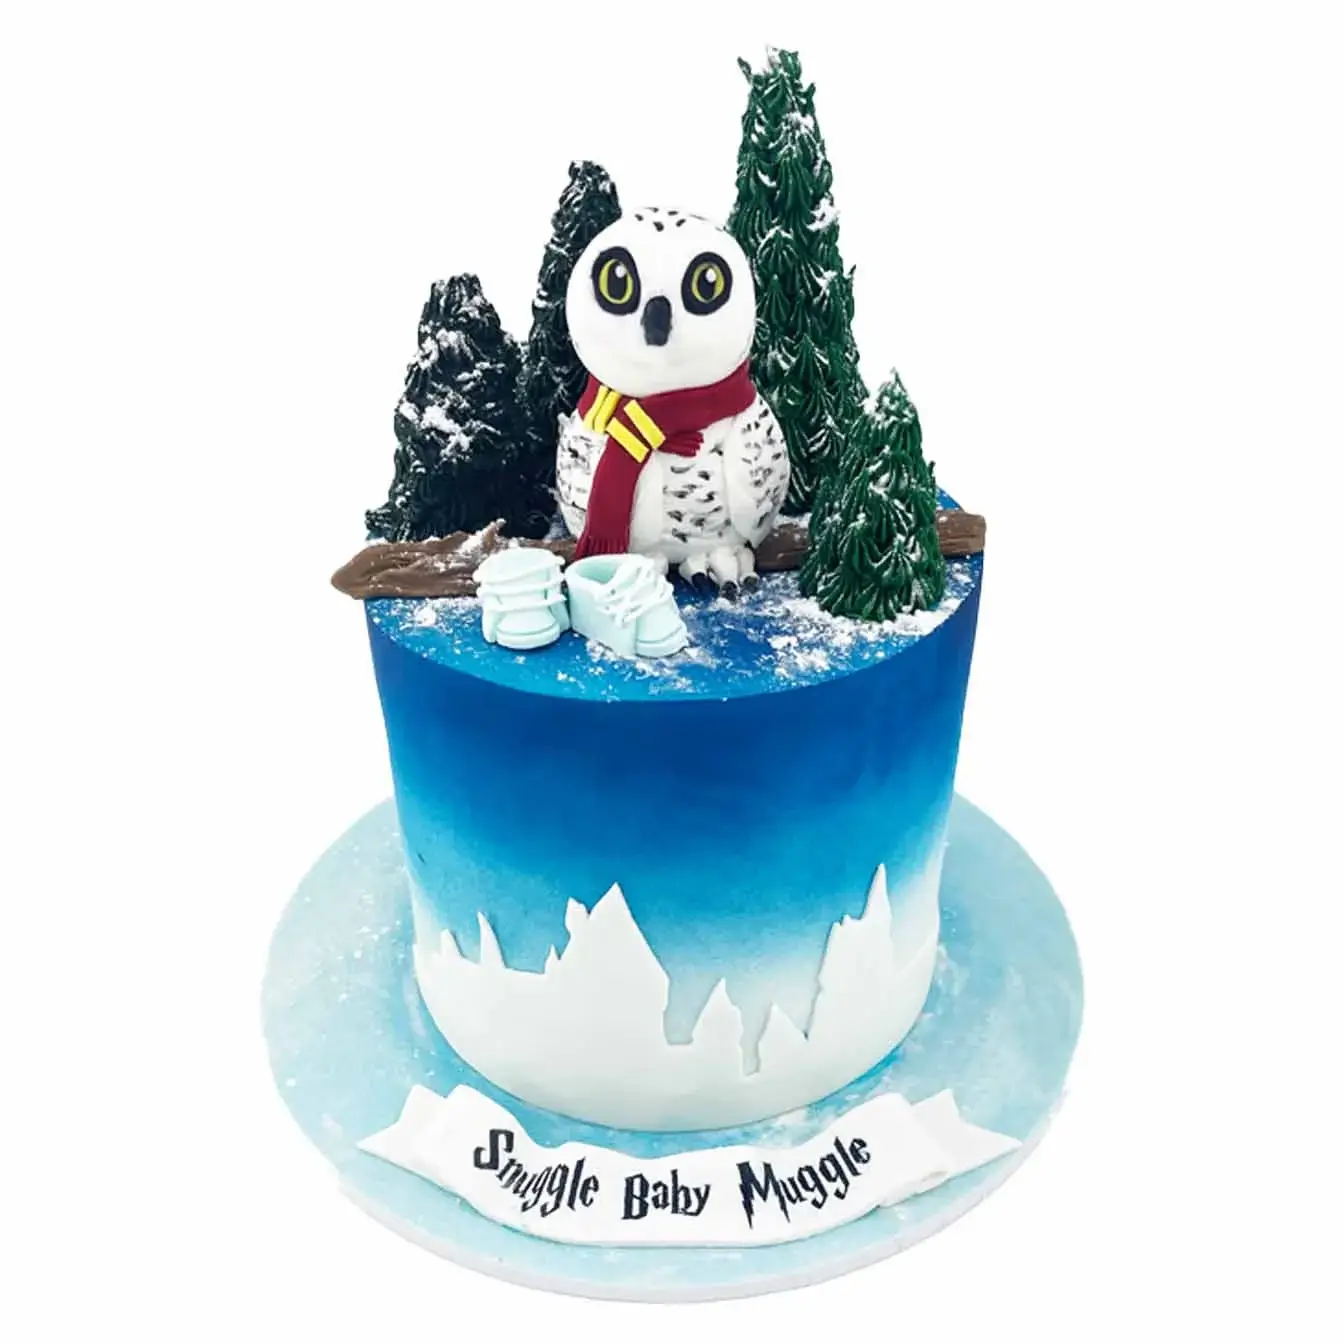 Snuggle Baby Muggle Shower Cake - A magical cake with a blue ombre base, Hogwarts Castle silhouette, and Hedwig perched on top, a spellbinding centerpiece for whimsical baby showers.